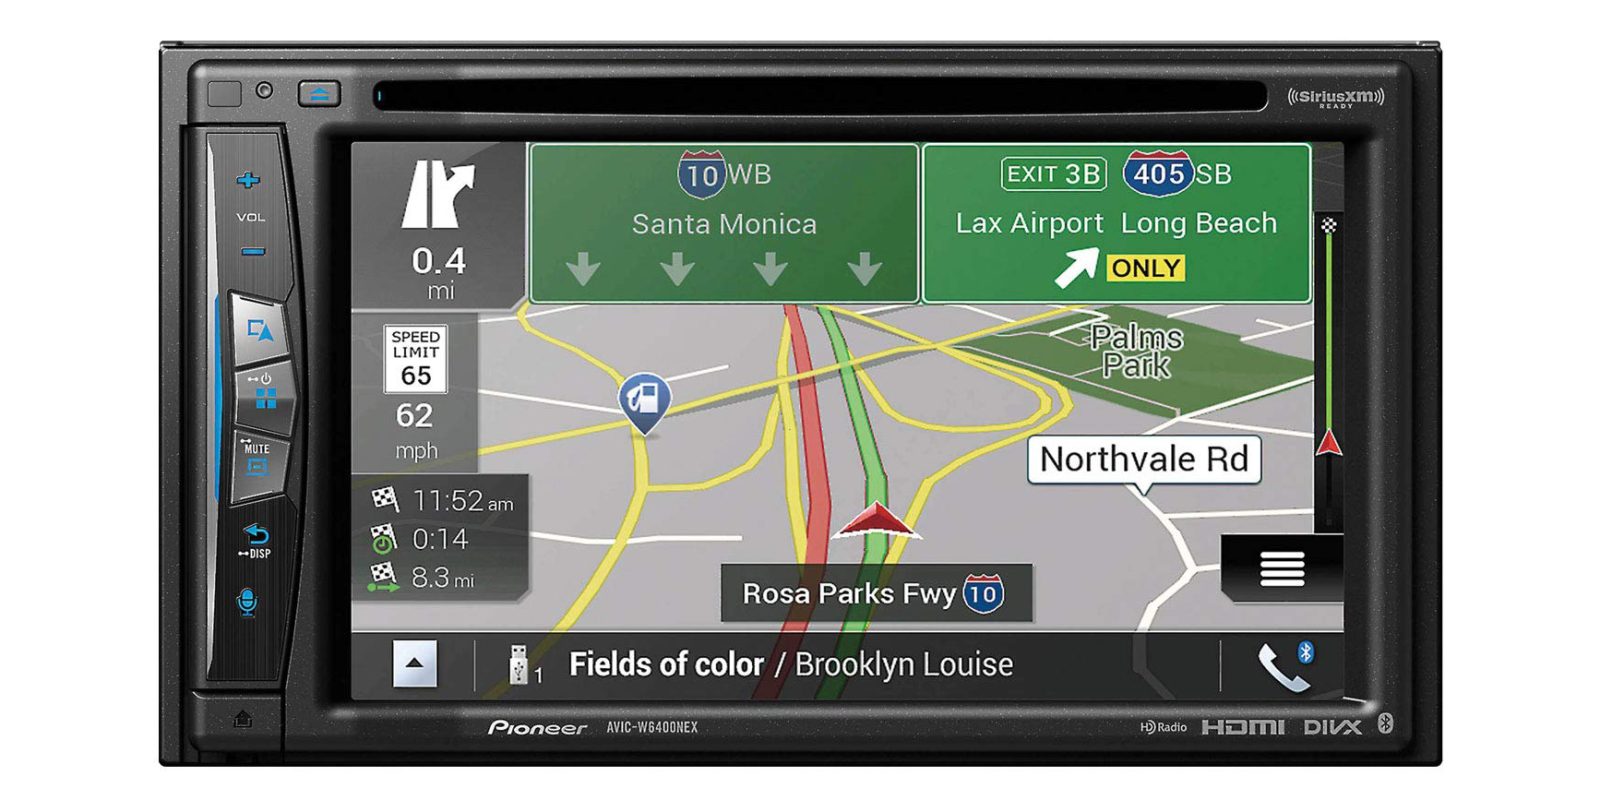 Pioneer Android Auto receiver